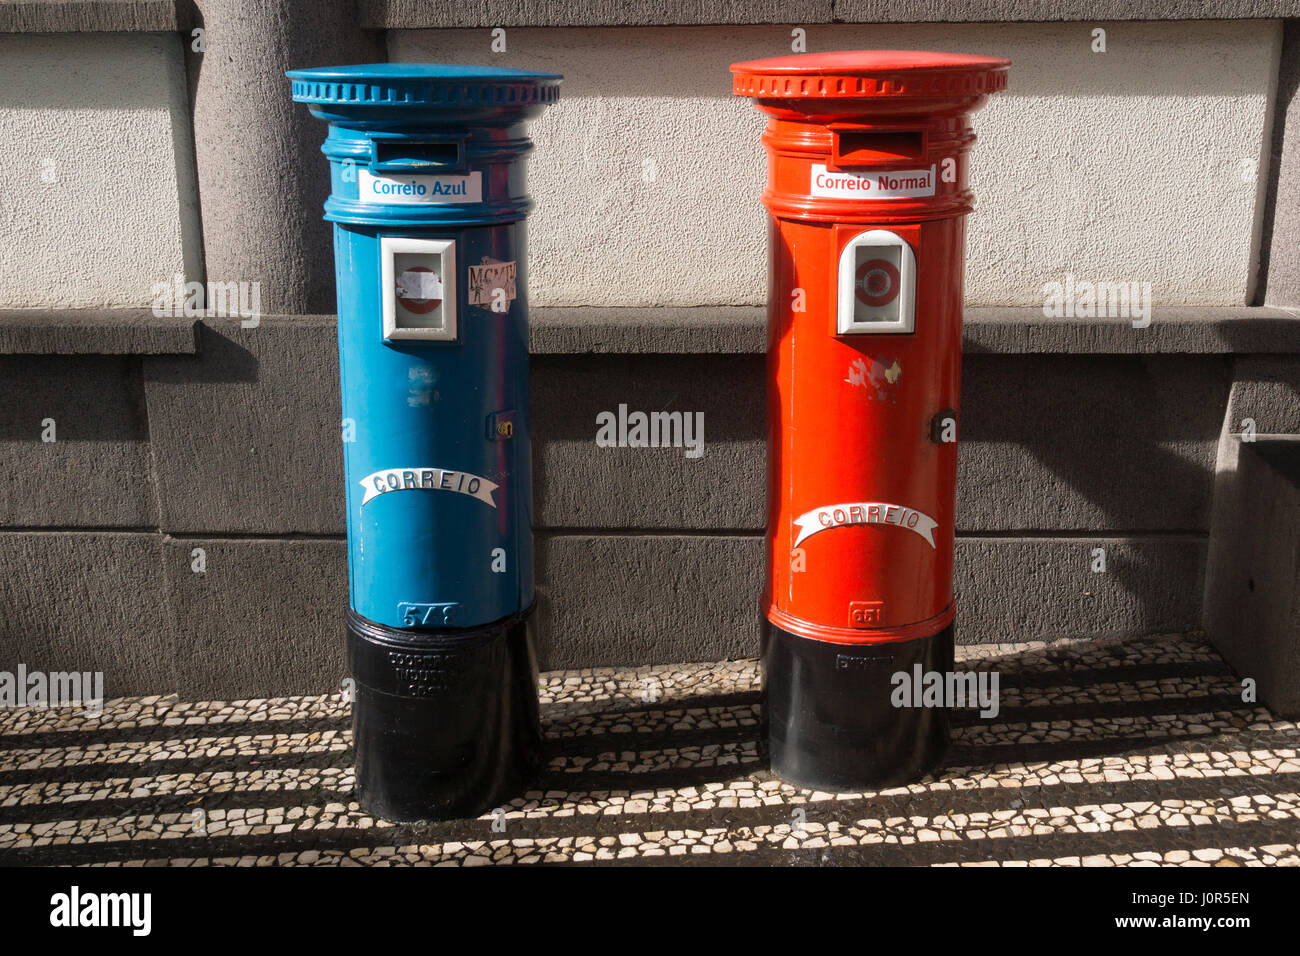 A first class (Correio Azul) and second class (Correio Normal) pillar box outside the Portugal Telecom building in Funchal, Madeira Stock Photo